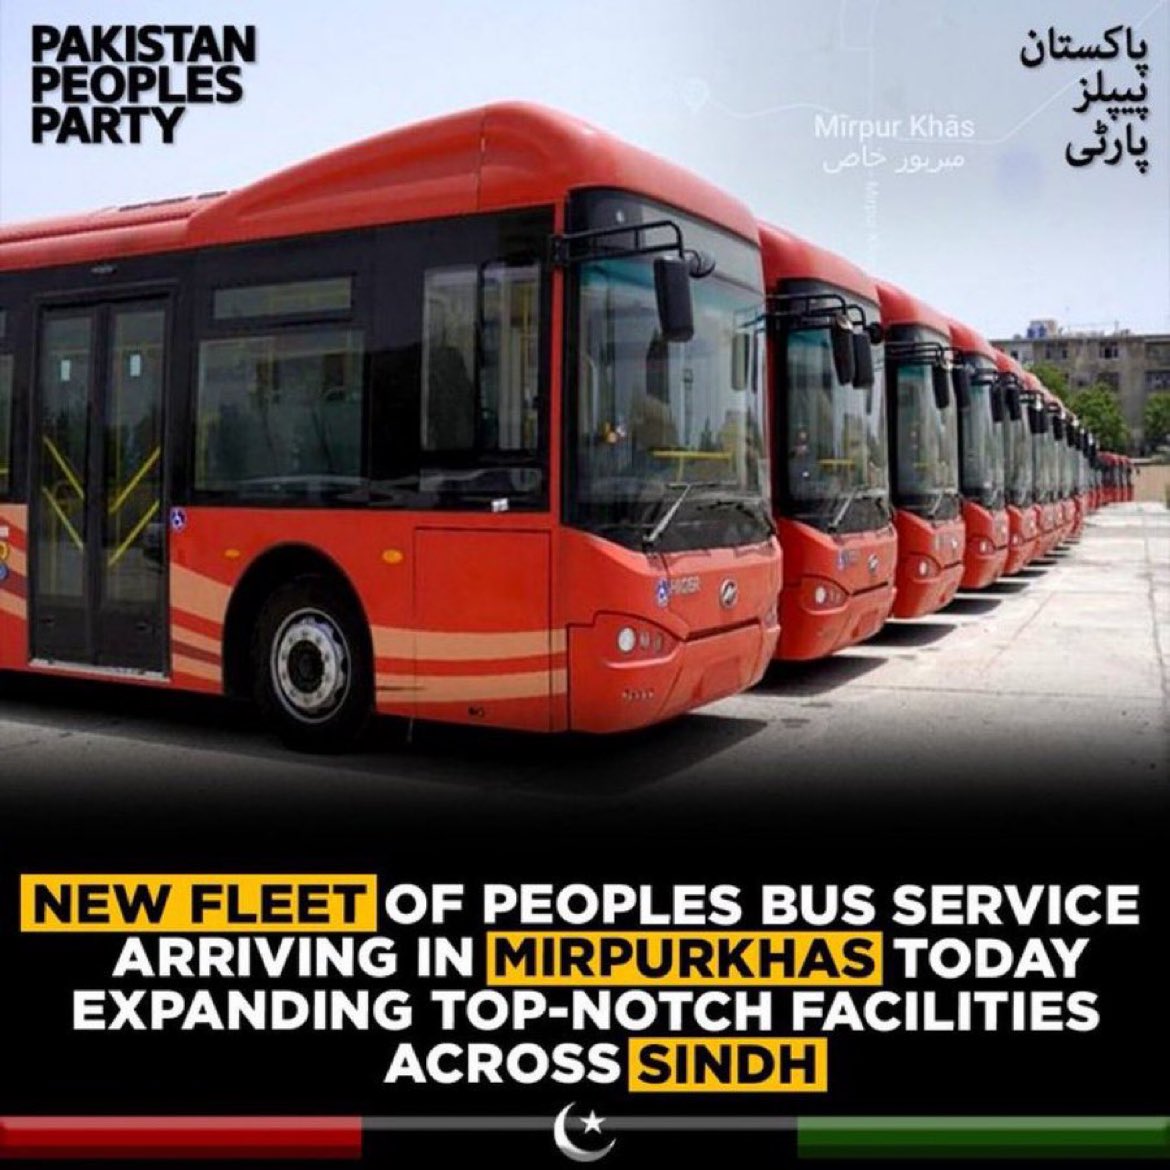 Good News 
@SindhGovt1 is launching People’s Bus Service in Mirpurkhas today ,
Credit goes to the @sharjeelinam senior minister of transport and mass transit .
Sindh has adopted highly facilitated transport System throughout the province 
#Pakistanpeoplesparty 
#BilawalBhutto…